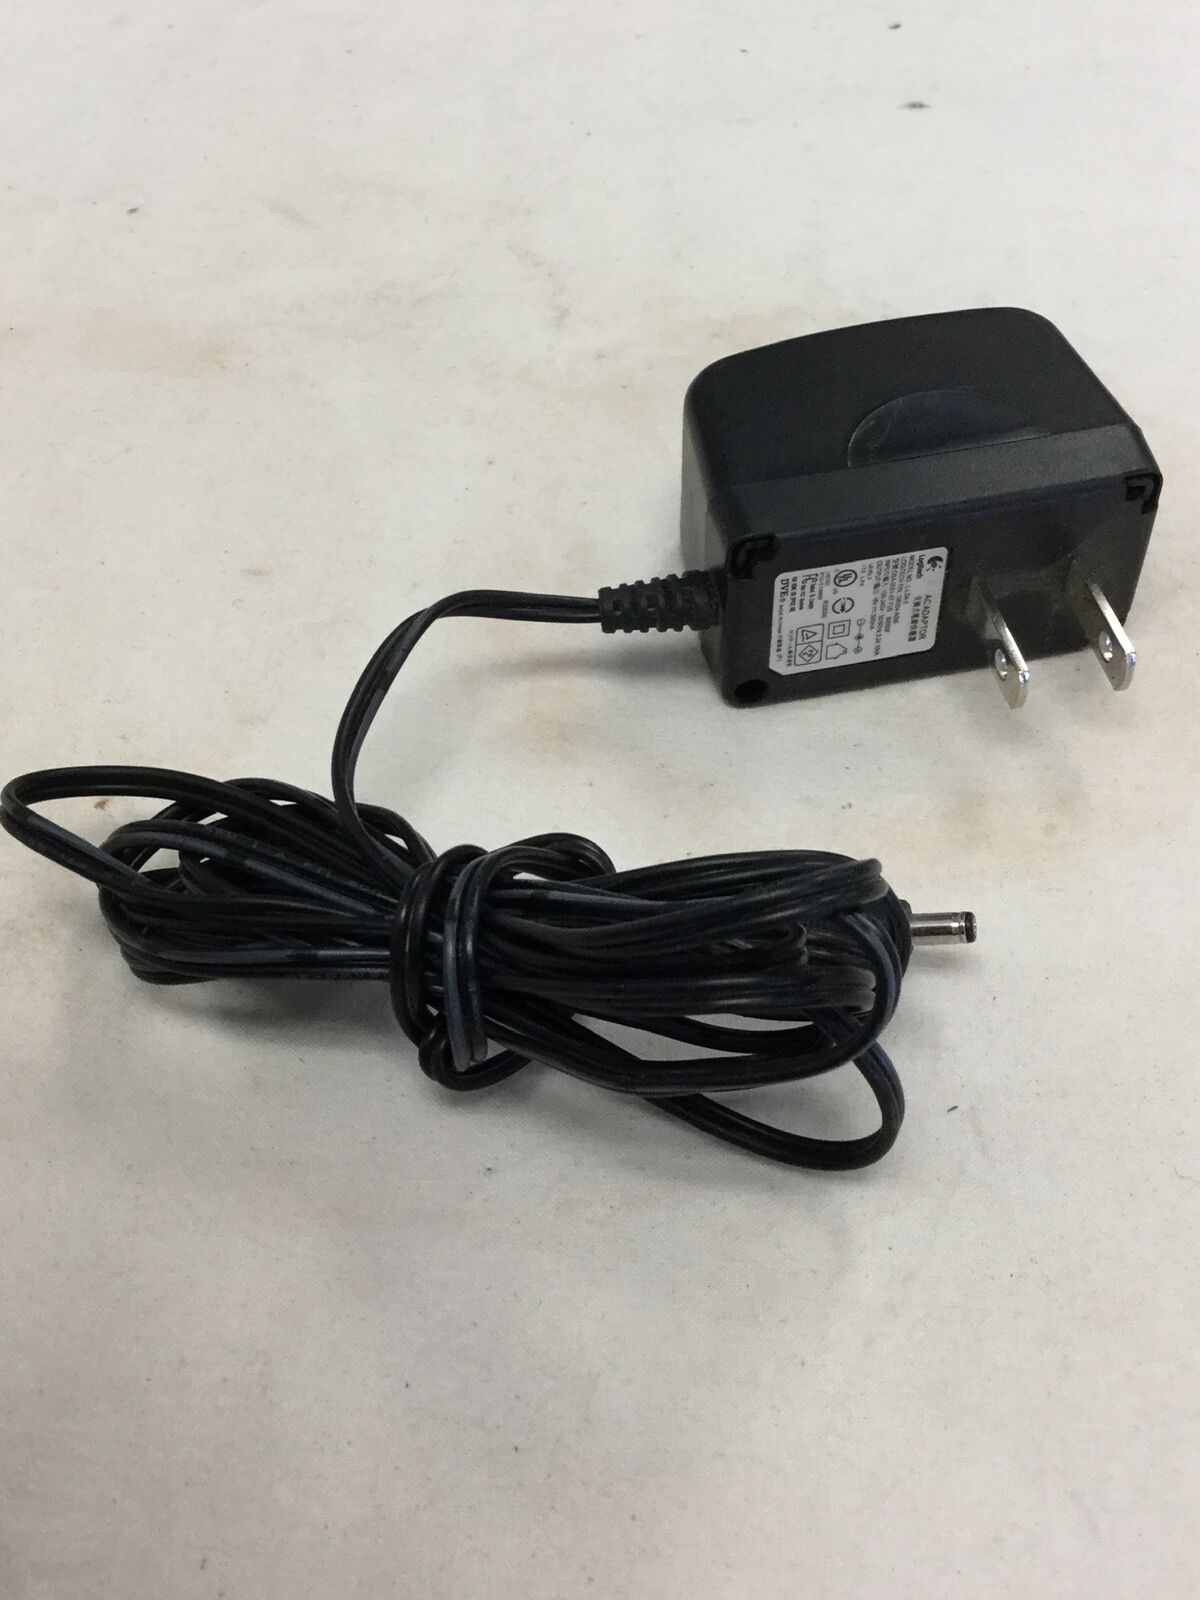 Logitech 880.890.720 AC Adapter Power Supply Cord Cable Charger